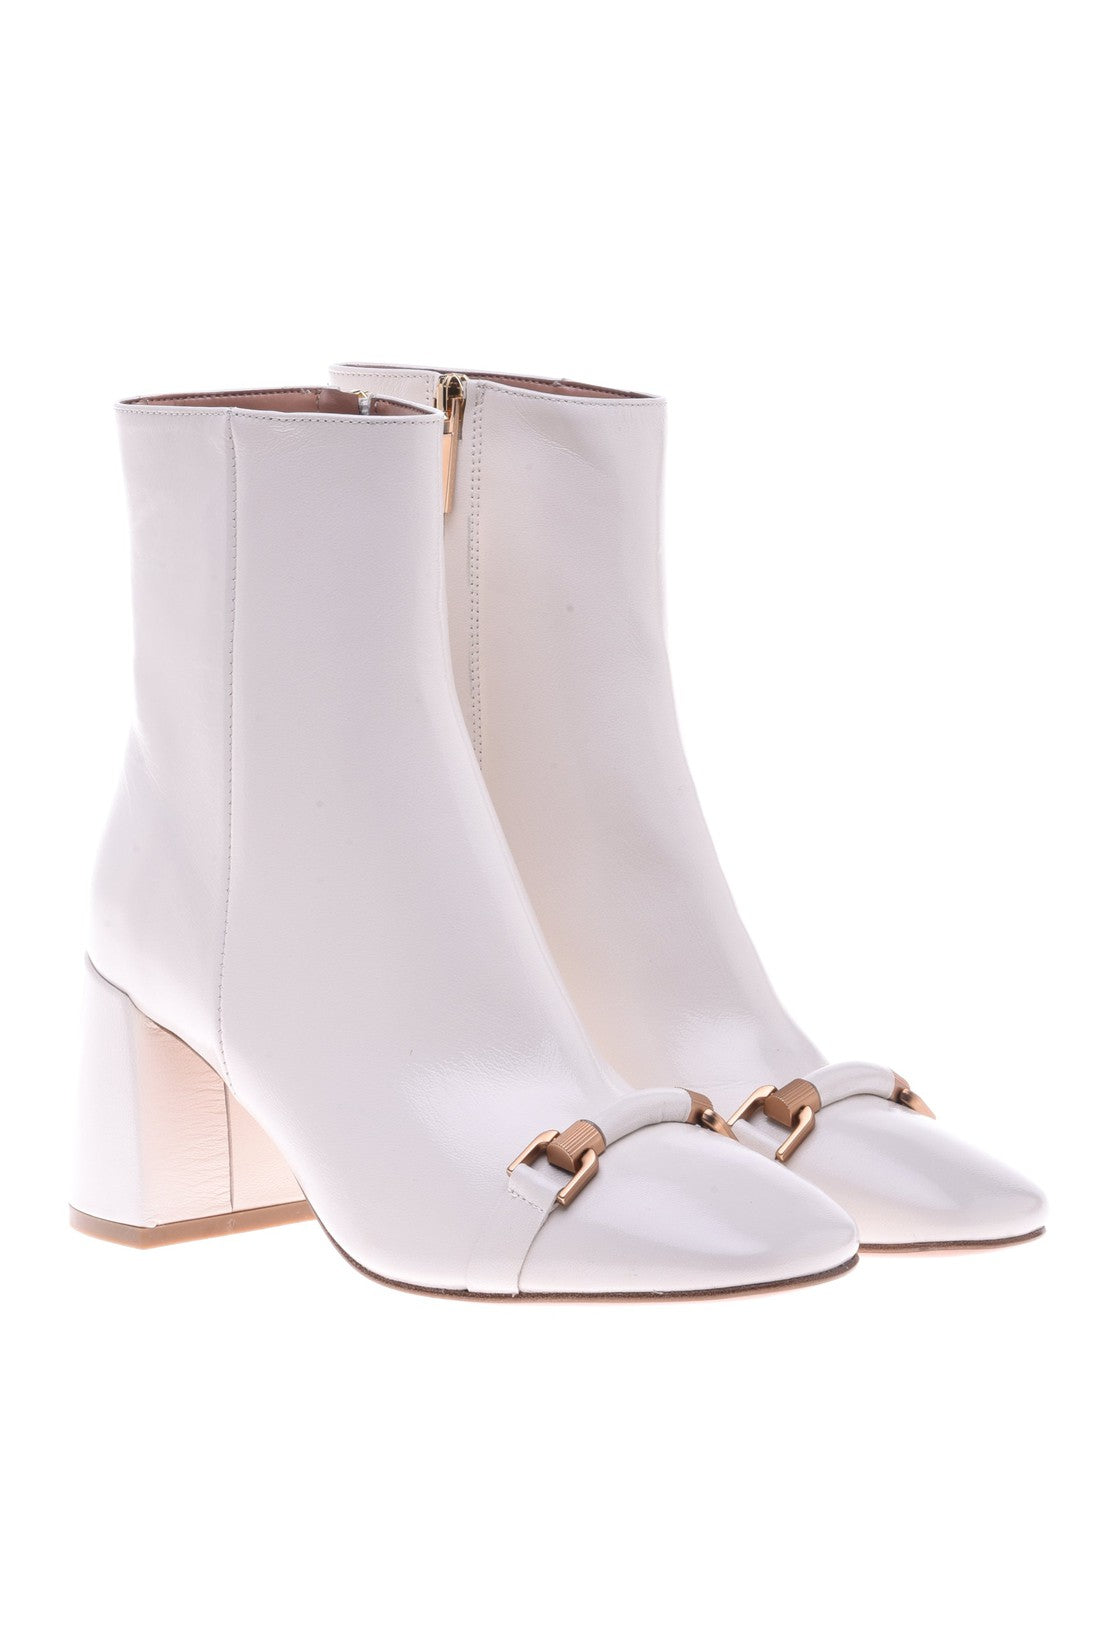 BALDININI-OUTLET-SALE-Ankle-boot-in-cream-naplak-Stiefel-Stiefeletten-ARCHIVE-COLLECTION-3.jpg